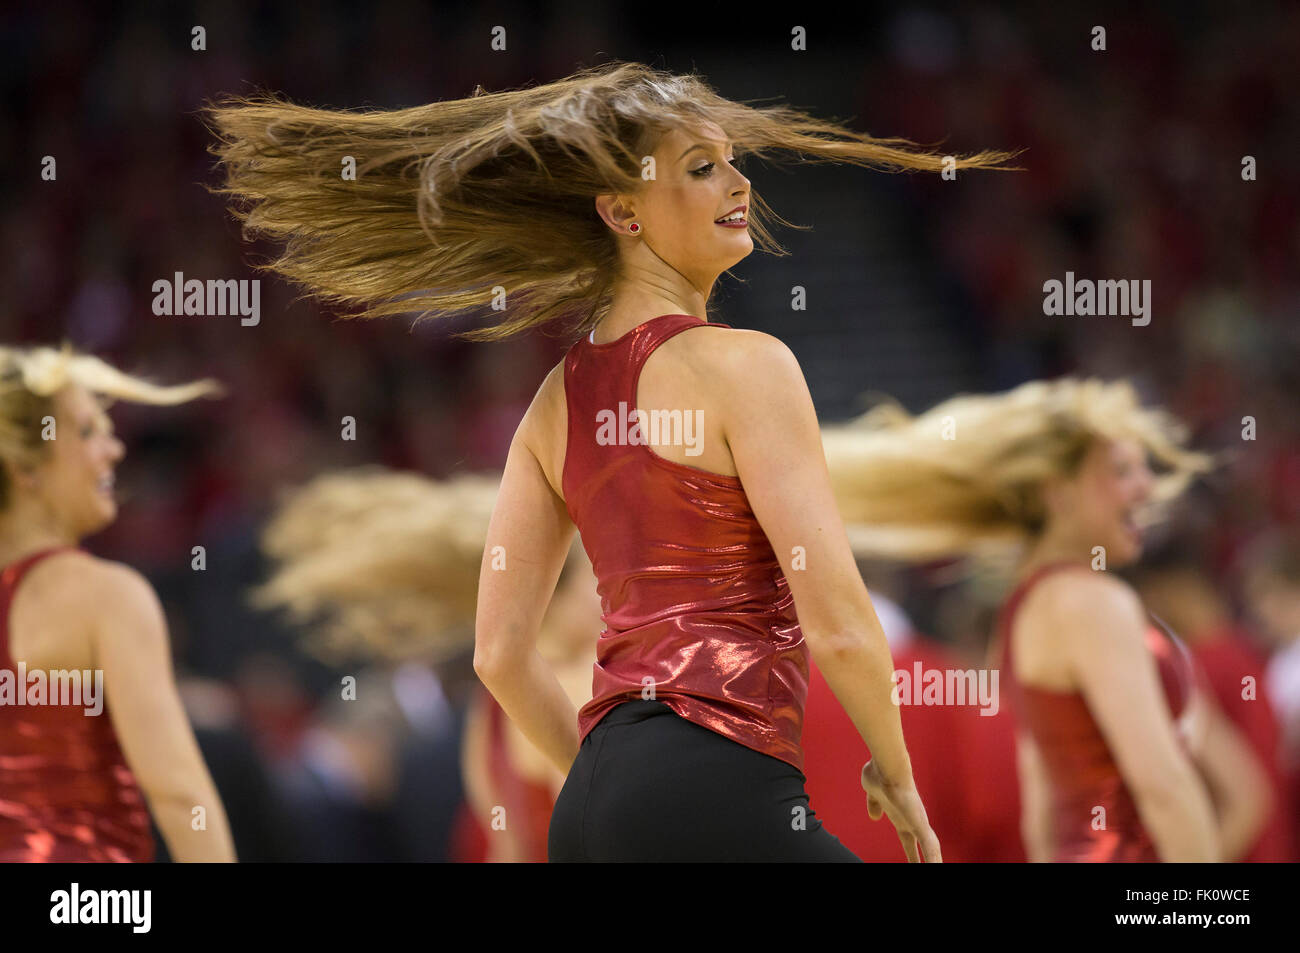 Madison, WI, USA. 28th Feb, 2016. Wisconsin Badgers cheerleaders entertain the crowd during the NCAA Basketball game between the Michigan Wolverines and the Wisconsin Badgers at the Kohl Center in Madison, WI. Wisconsin defeated Michigan 68-57. John Fisher/CSM/Alamy Live News Stock Photo